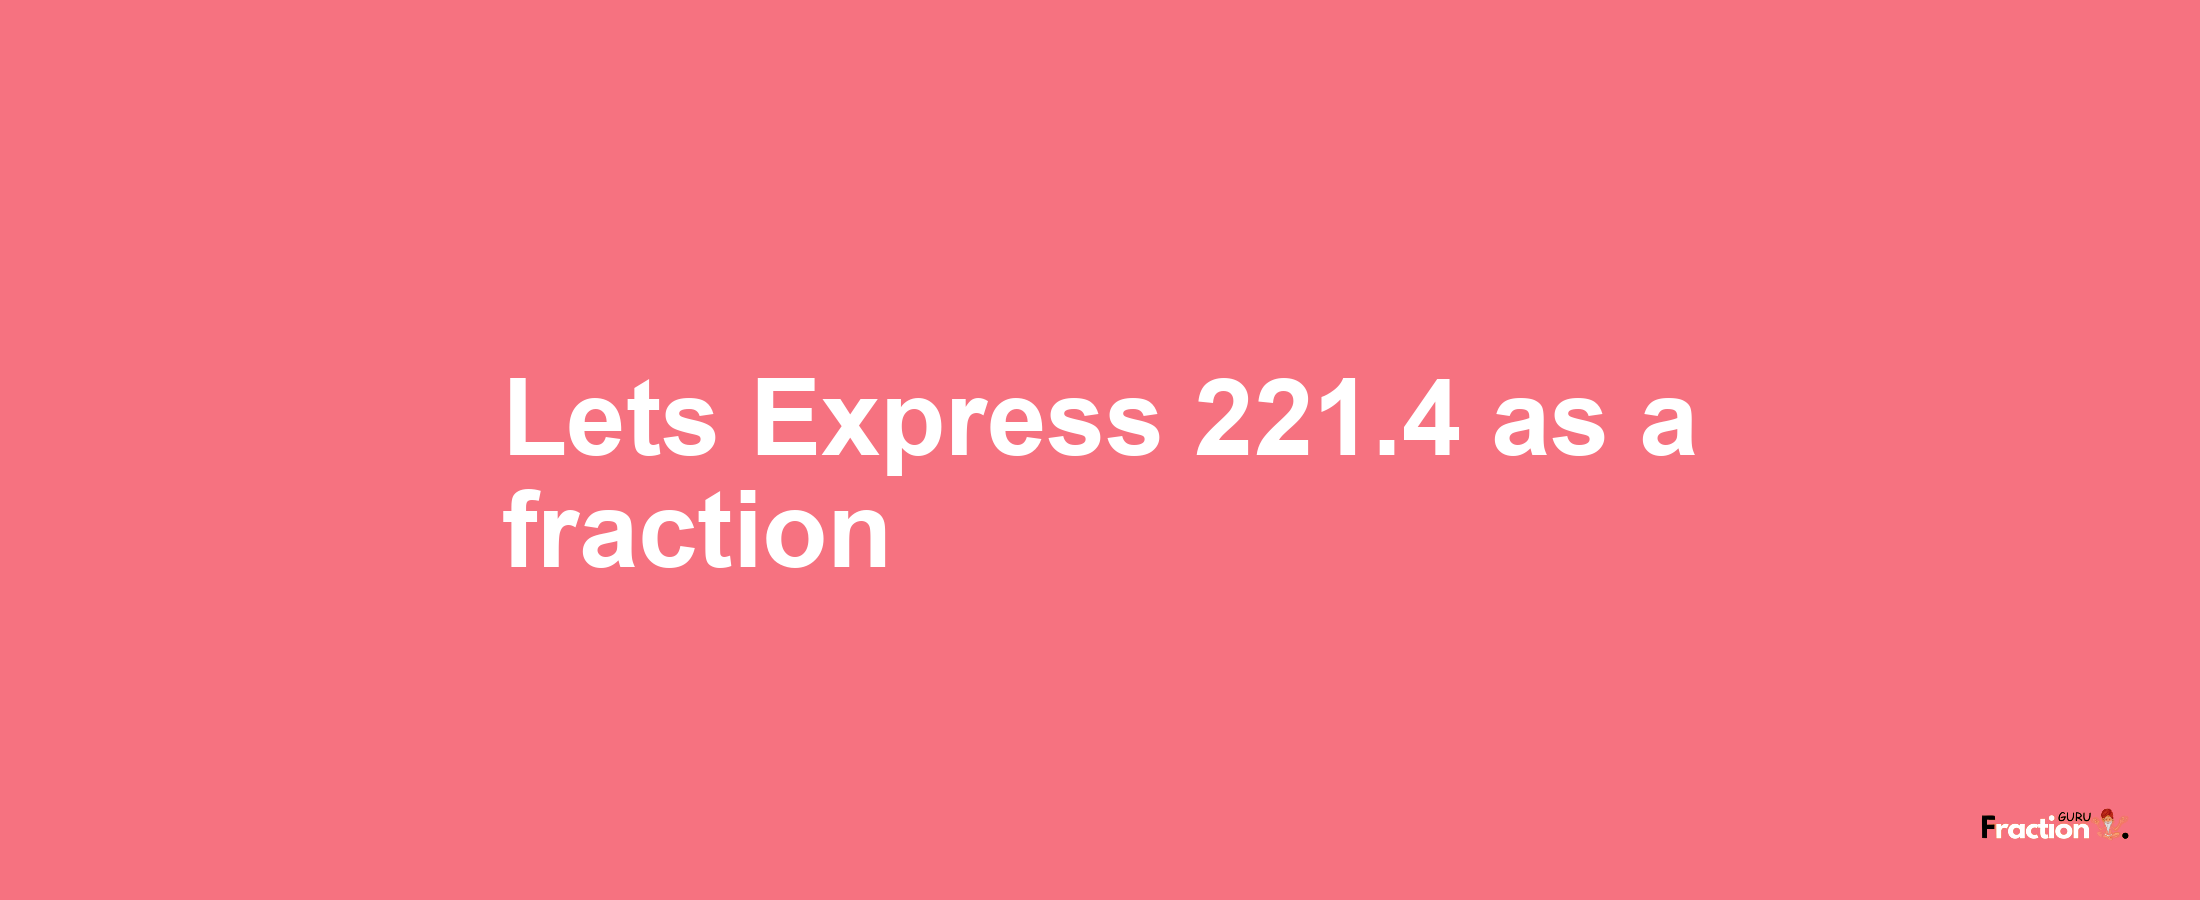 Lets Express 221.4 as afraction